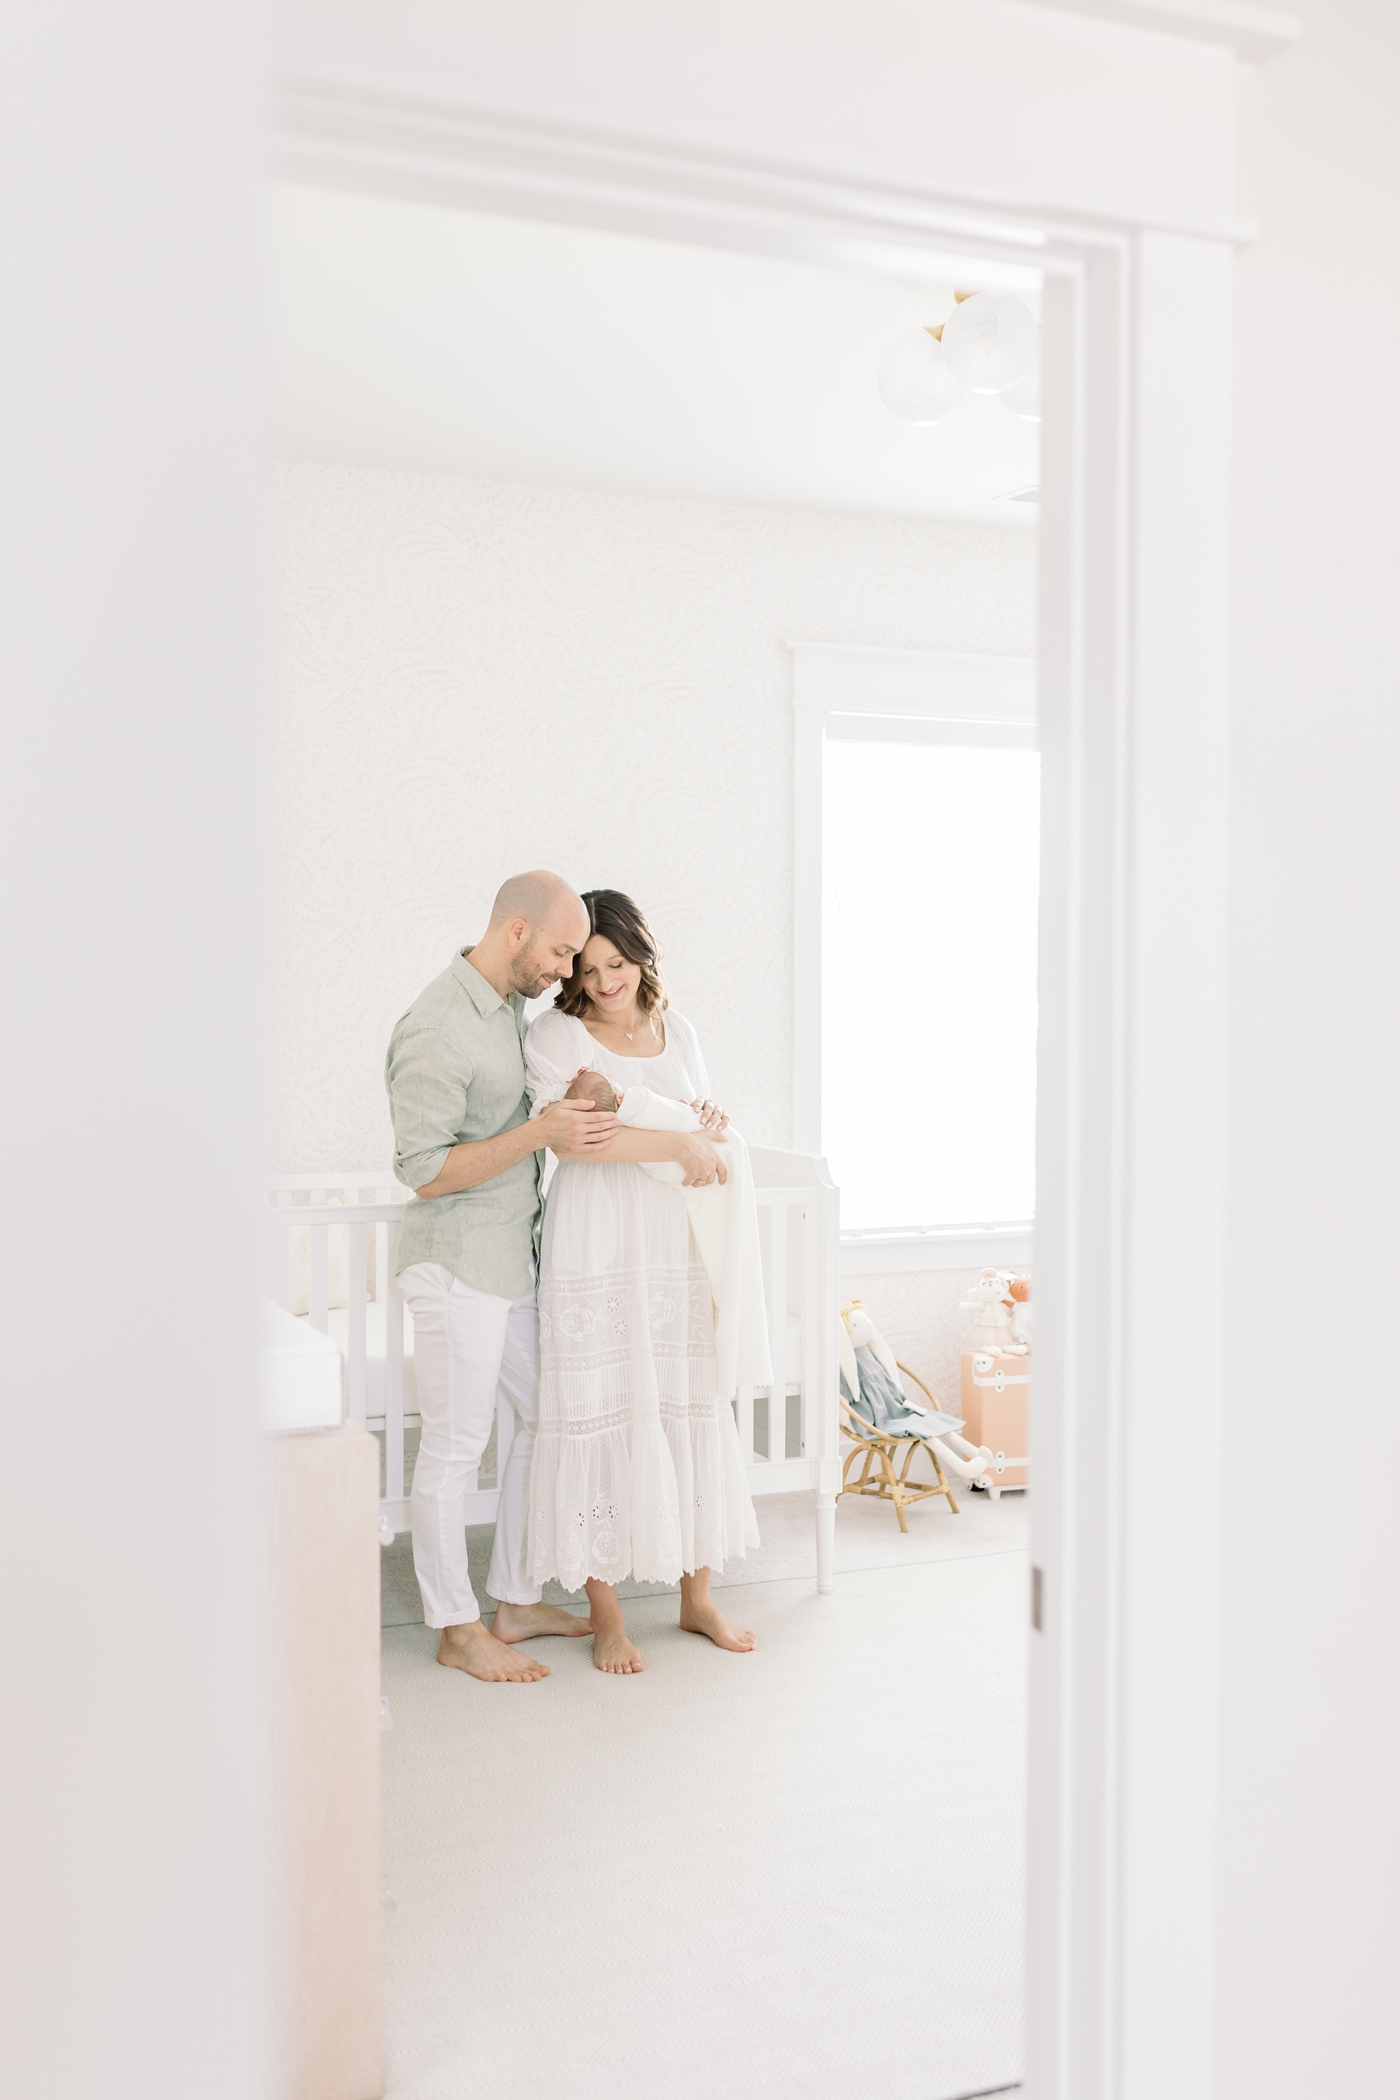 Mome and dad holding their baby girl in her nursery | Photo by Caitlyn Motycka